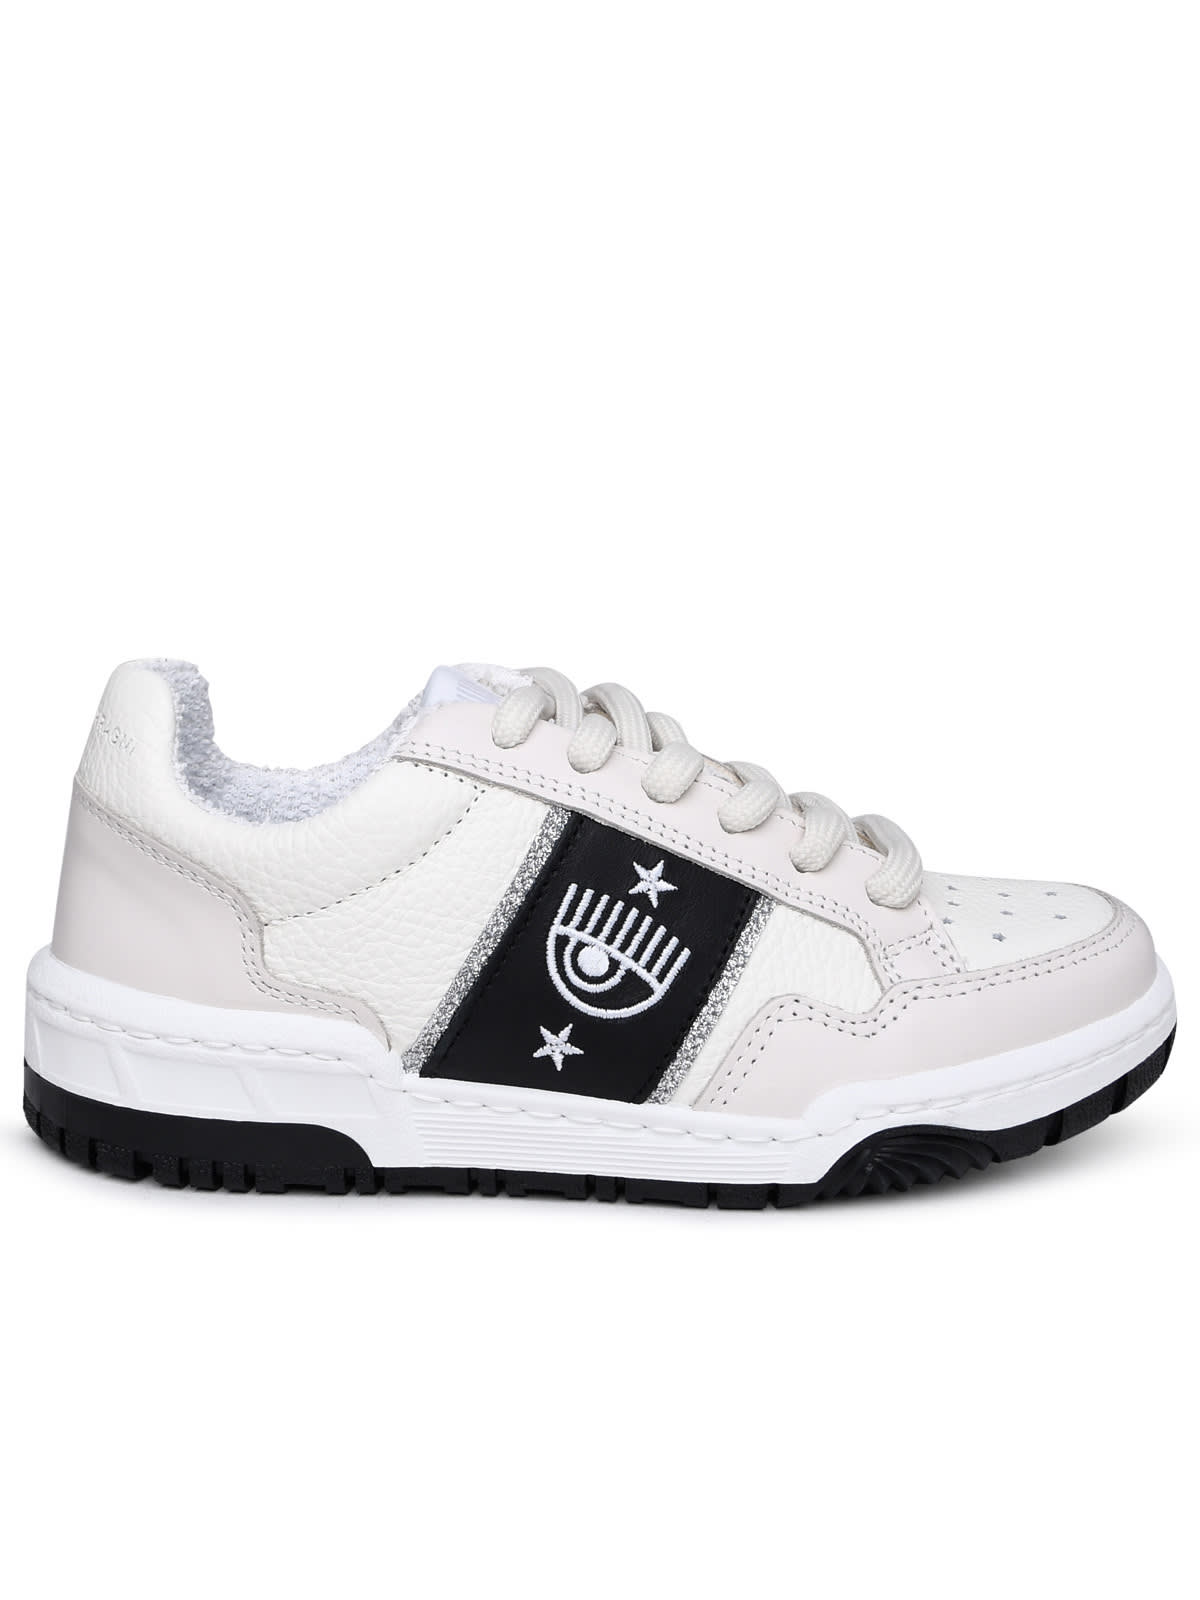 Cf1 White Leather Sneakers